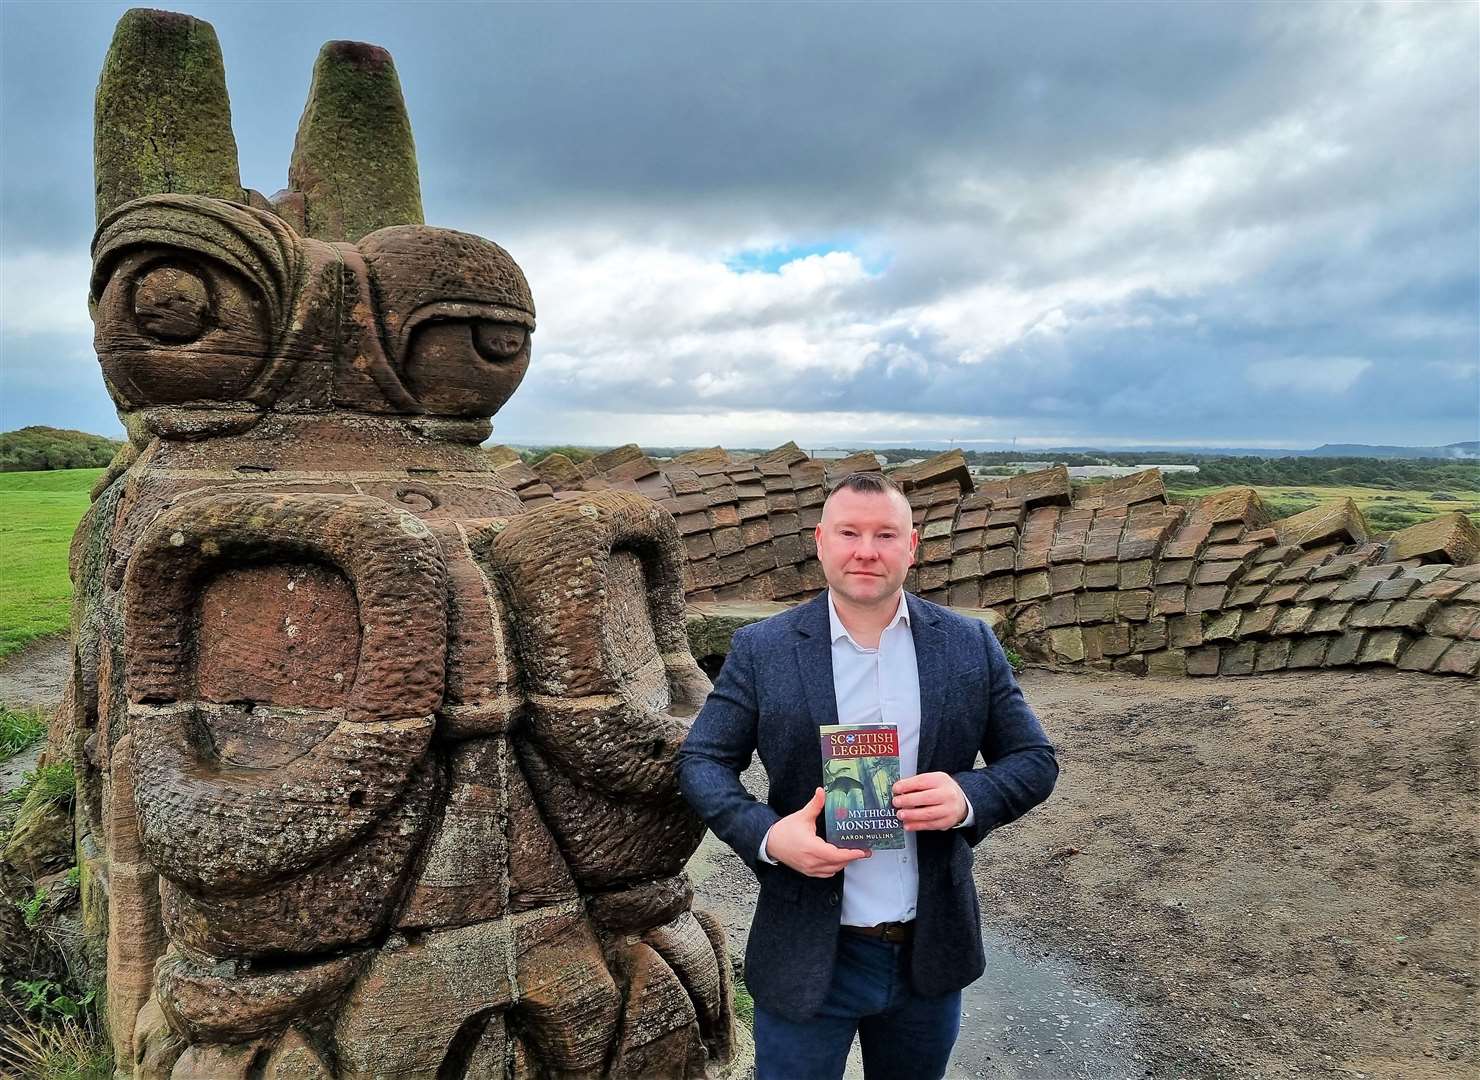 Aaron said he went on a hunt for the Loch Ness Monster. He is pictured here standing beside the Stone Dragon statue in Irvine.